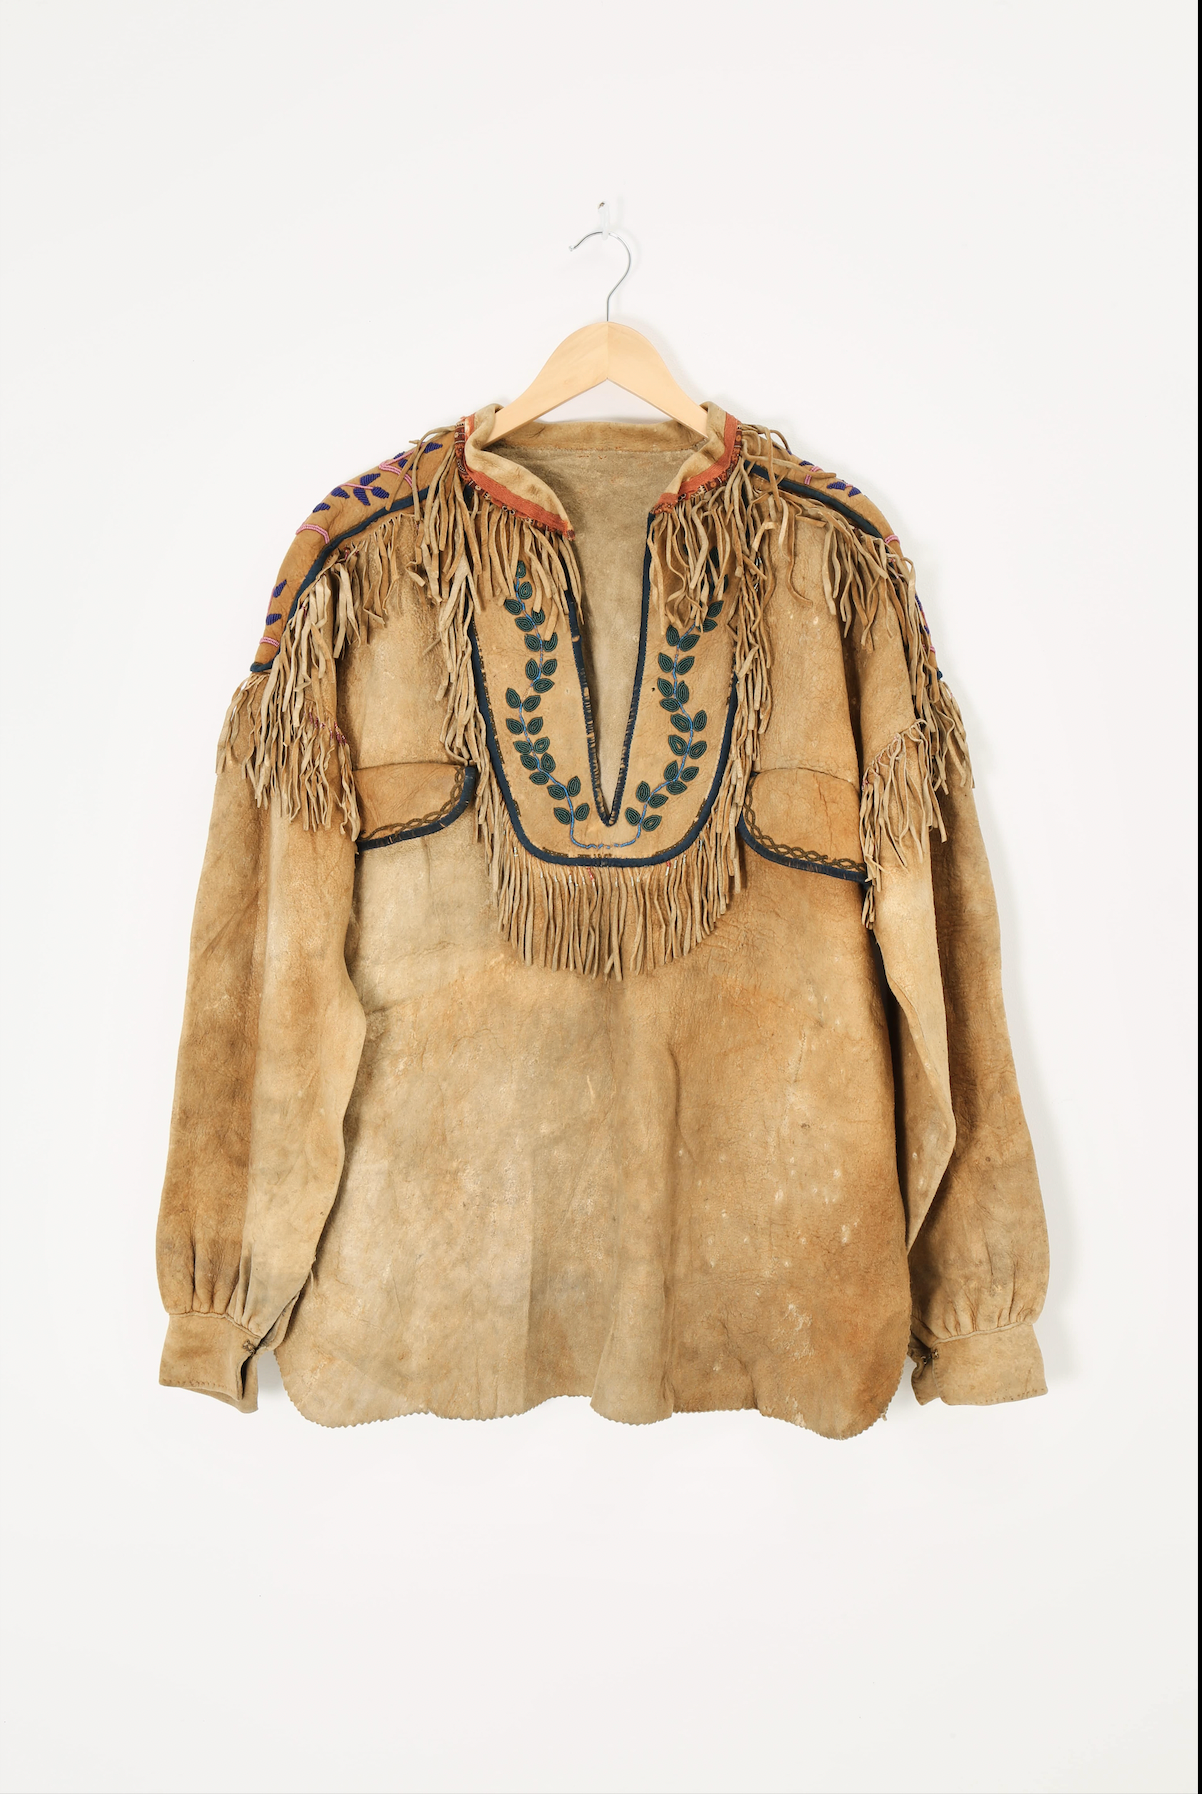 How An Indigenous Canadian Jacket Ended Up At Our South Yorkshire Warehouse